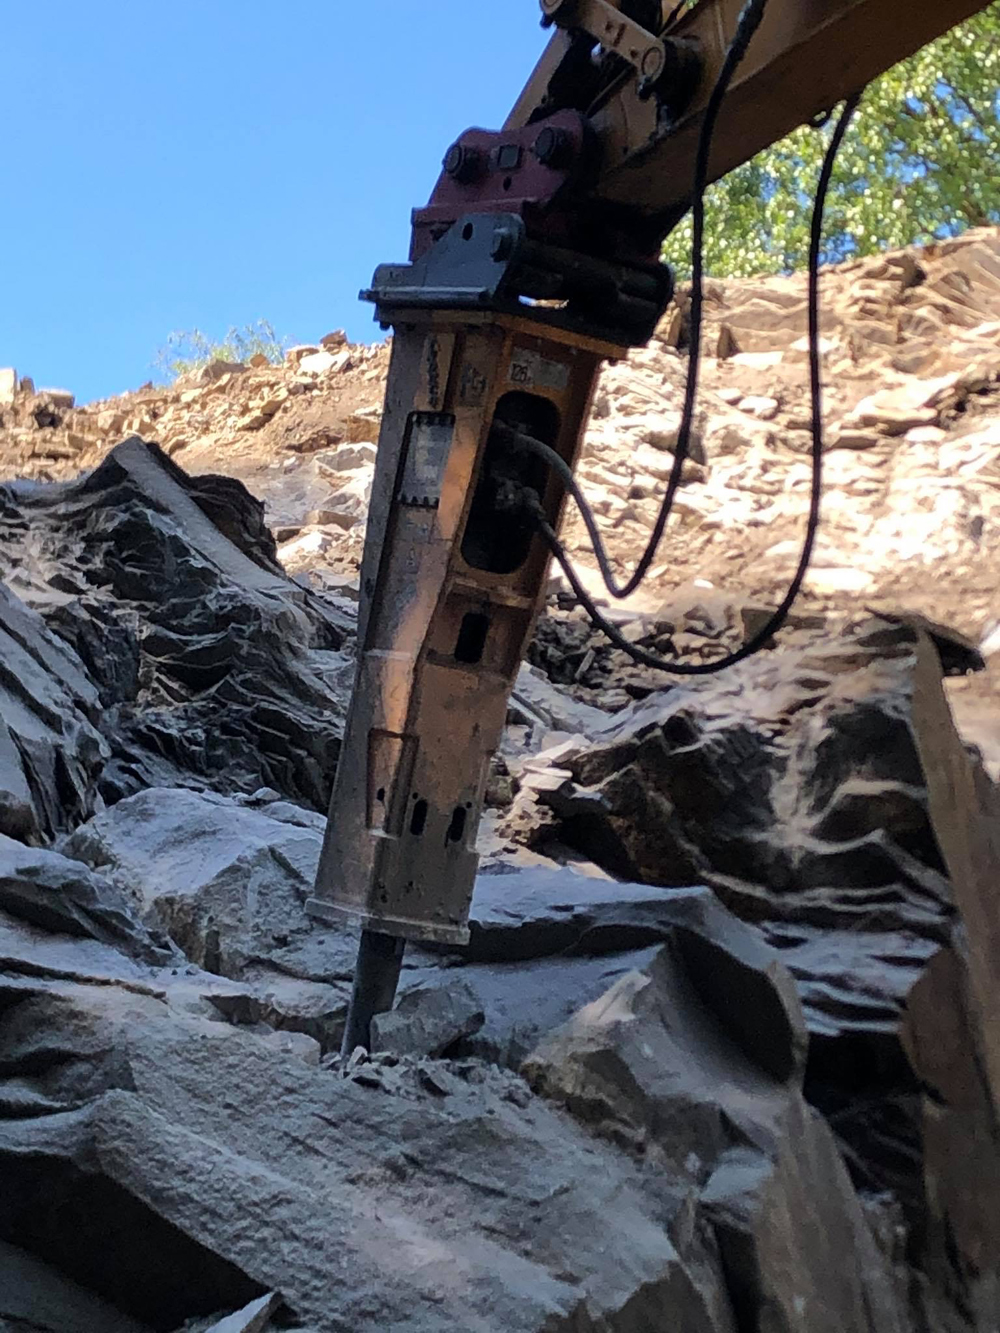 An Indeco HP 2500 FS hydraulic hammer is being used at Lange e.K.’s quarry and sawmill in Sprockhövel to help process its tough Ruhr sandstone